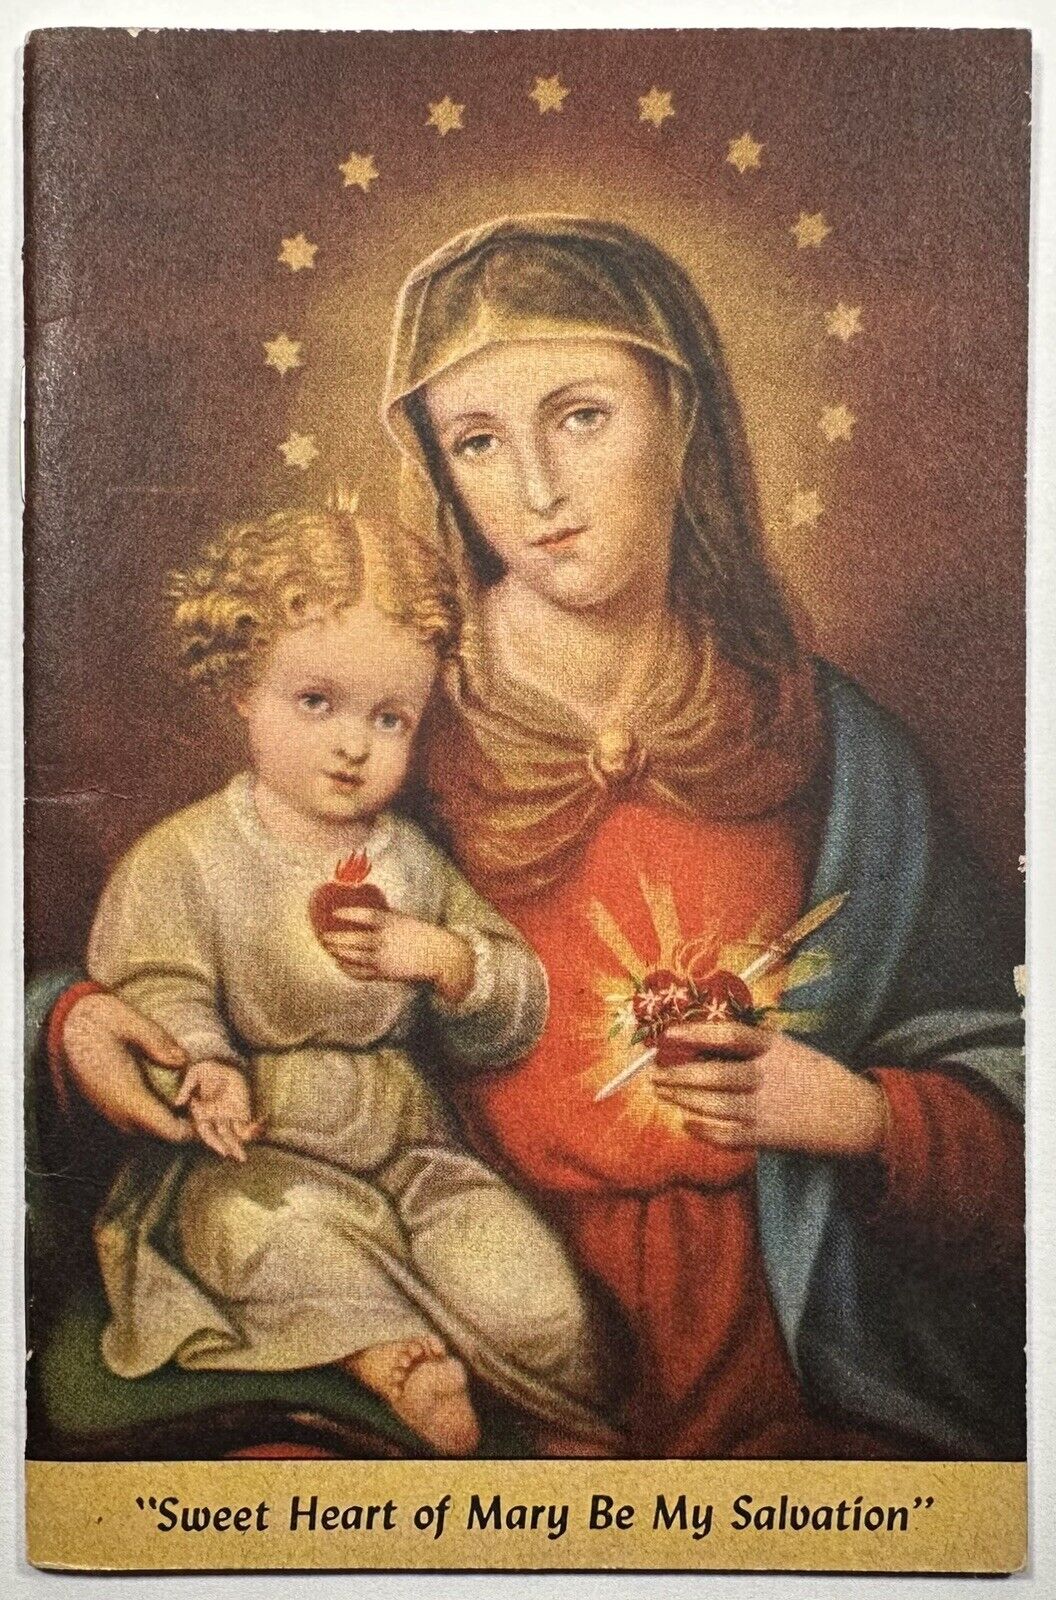 Novena to The Immaculate Heart of Mary, Vintage 1944 Holy Devotional Booklet.